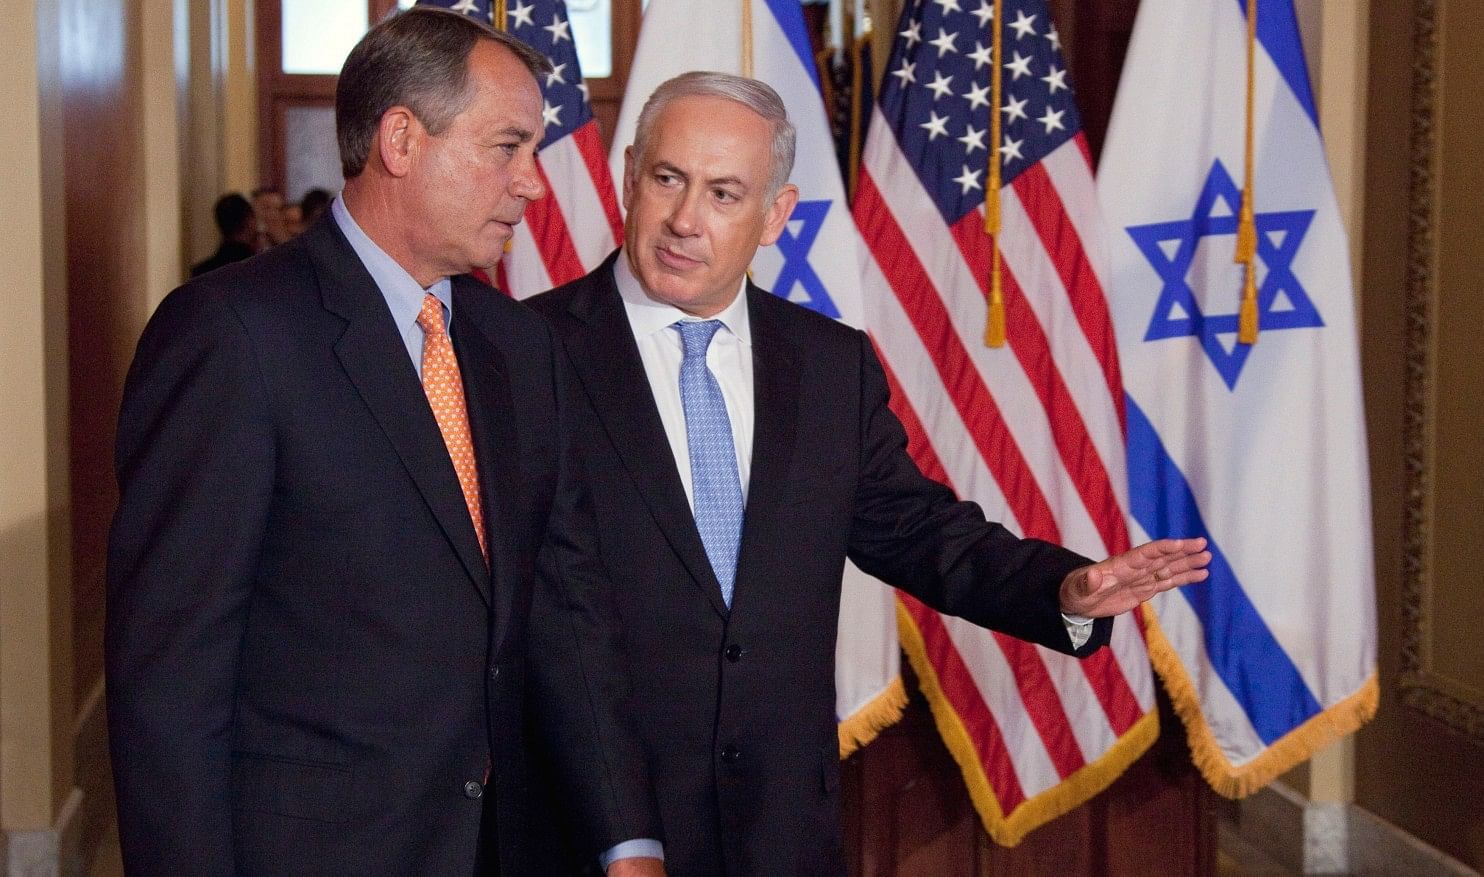 Israeli Prime Minister Benjamin Netanyahu, right, visited House Speaker John Boehner (R-Ohio) and the rest of Congress on May 24, 2011 in Washington. Netanyahu, who also addressed a joint session of Congress in 1996, accepted an invitation to do so for a third time, probably in February. Photo: AP